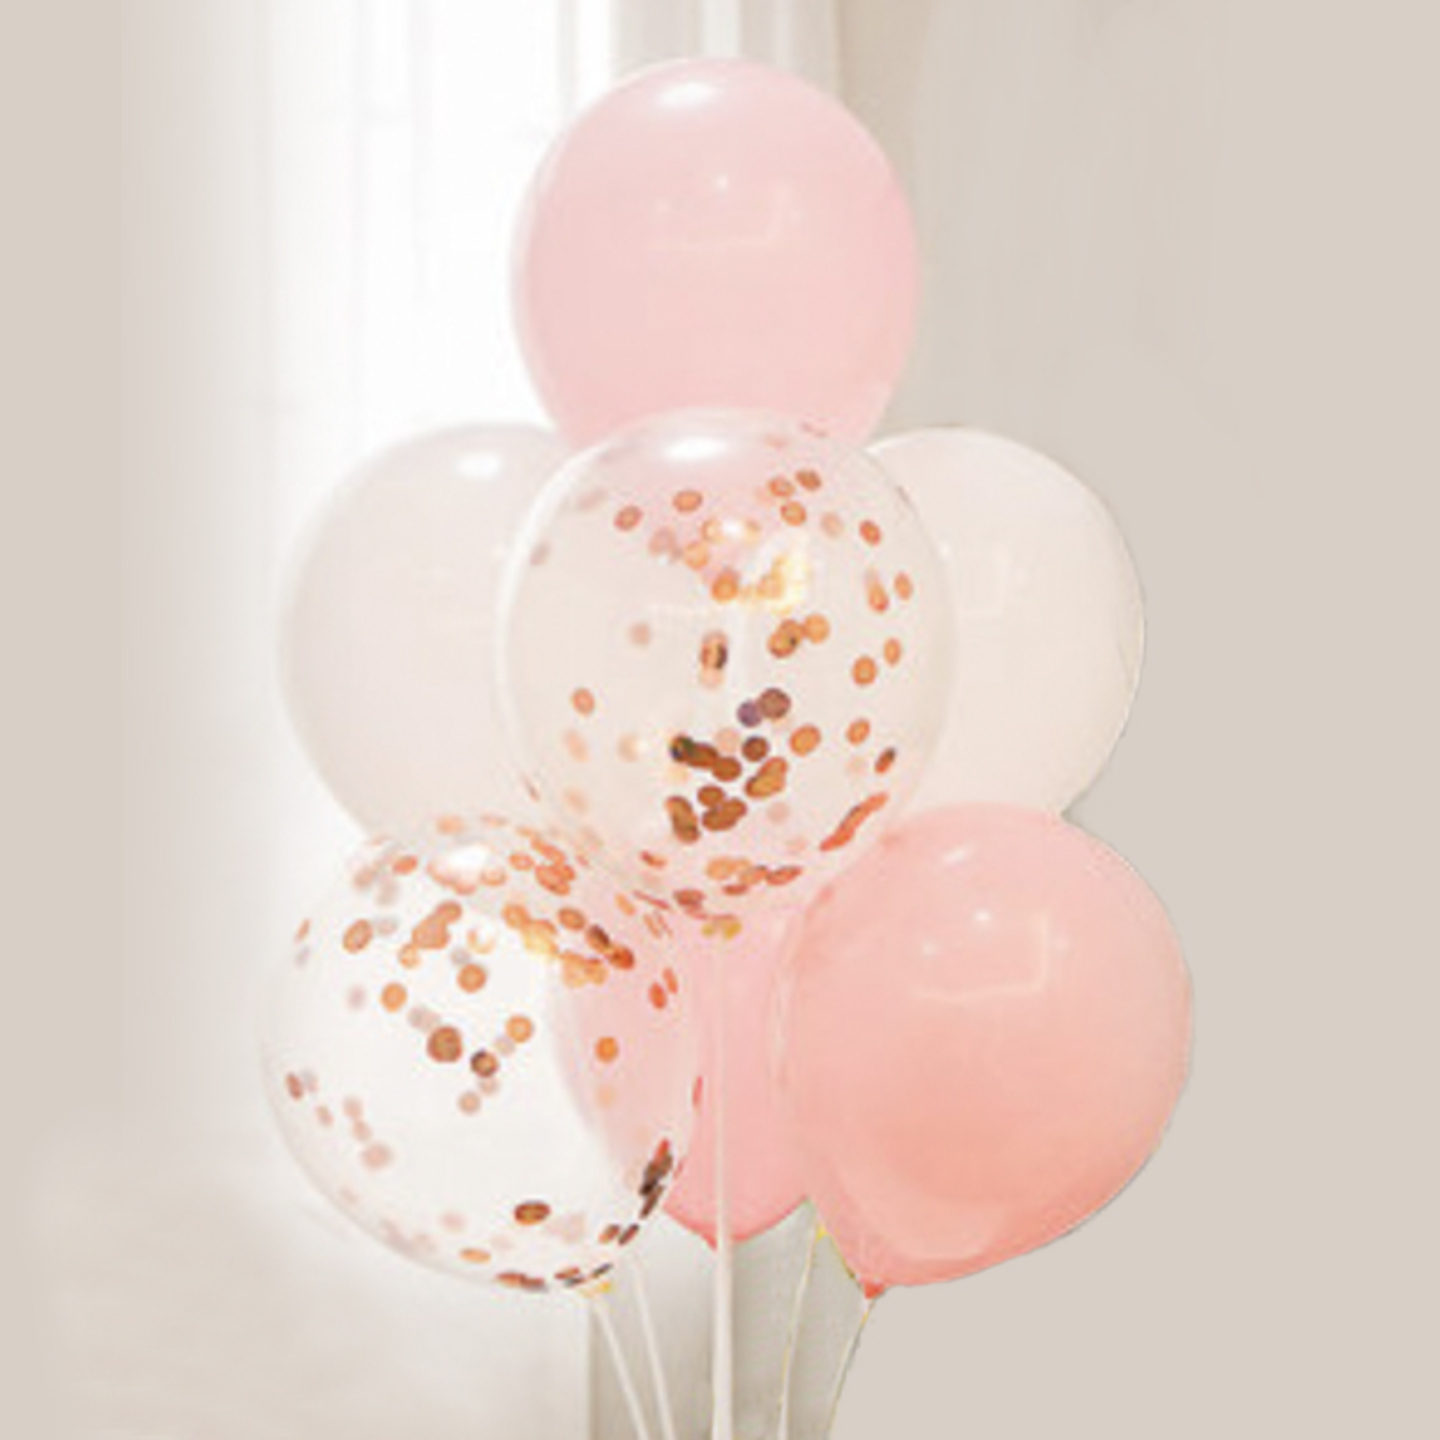 7 Pc Balloons Stand Set In Pink & White